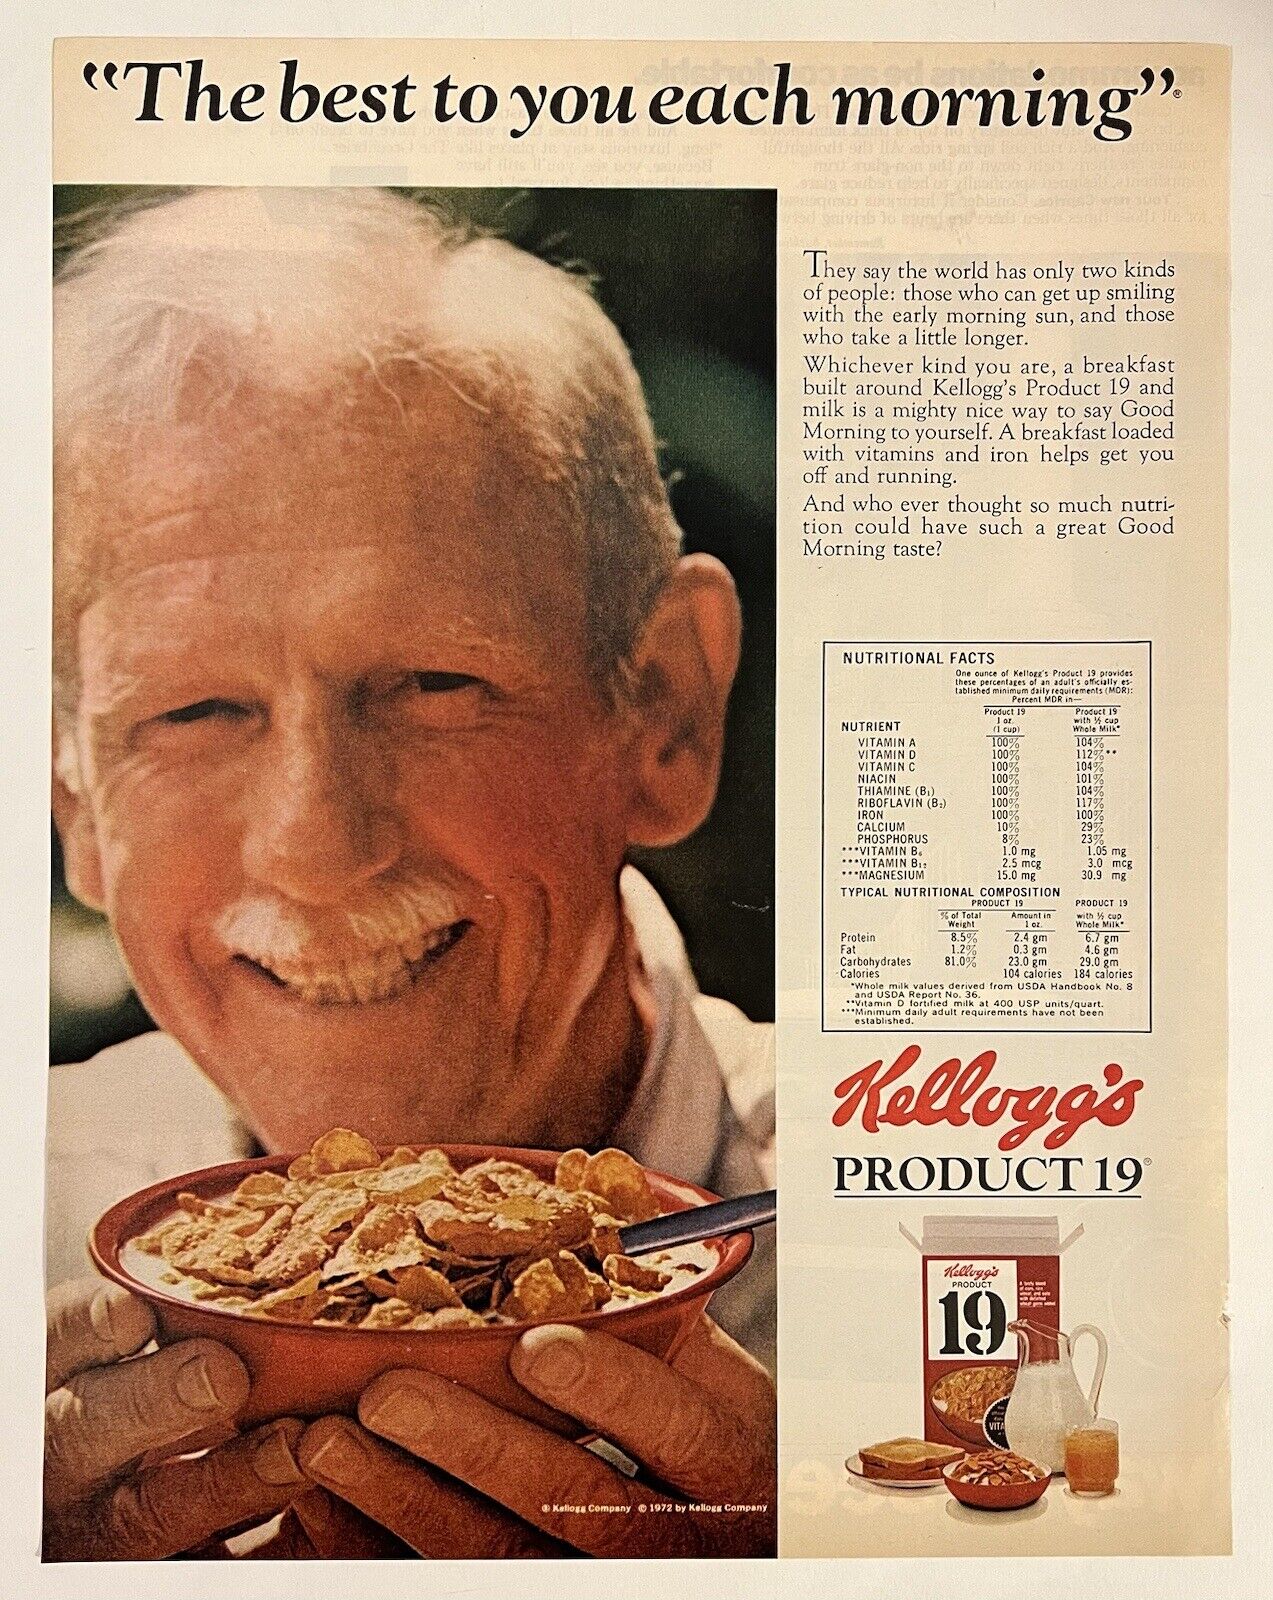 Kellogg’s Product 19 1968 Life Print Add “Best To You Each Morning”